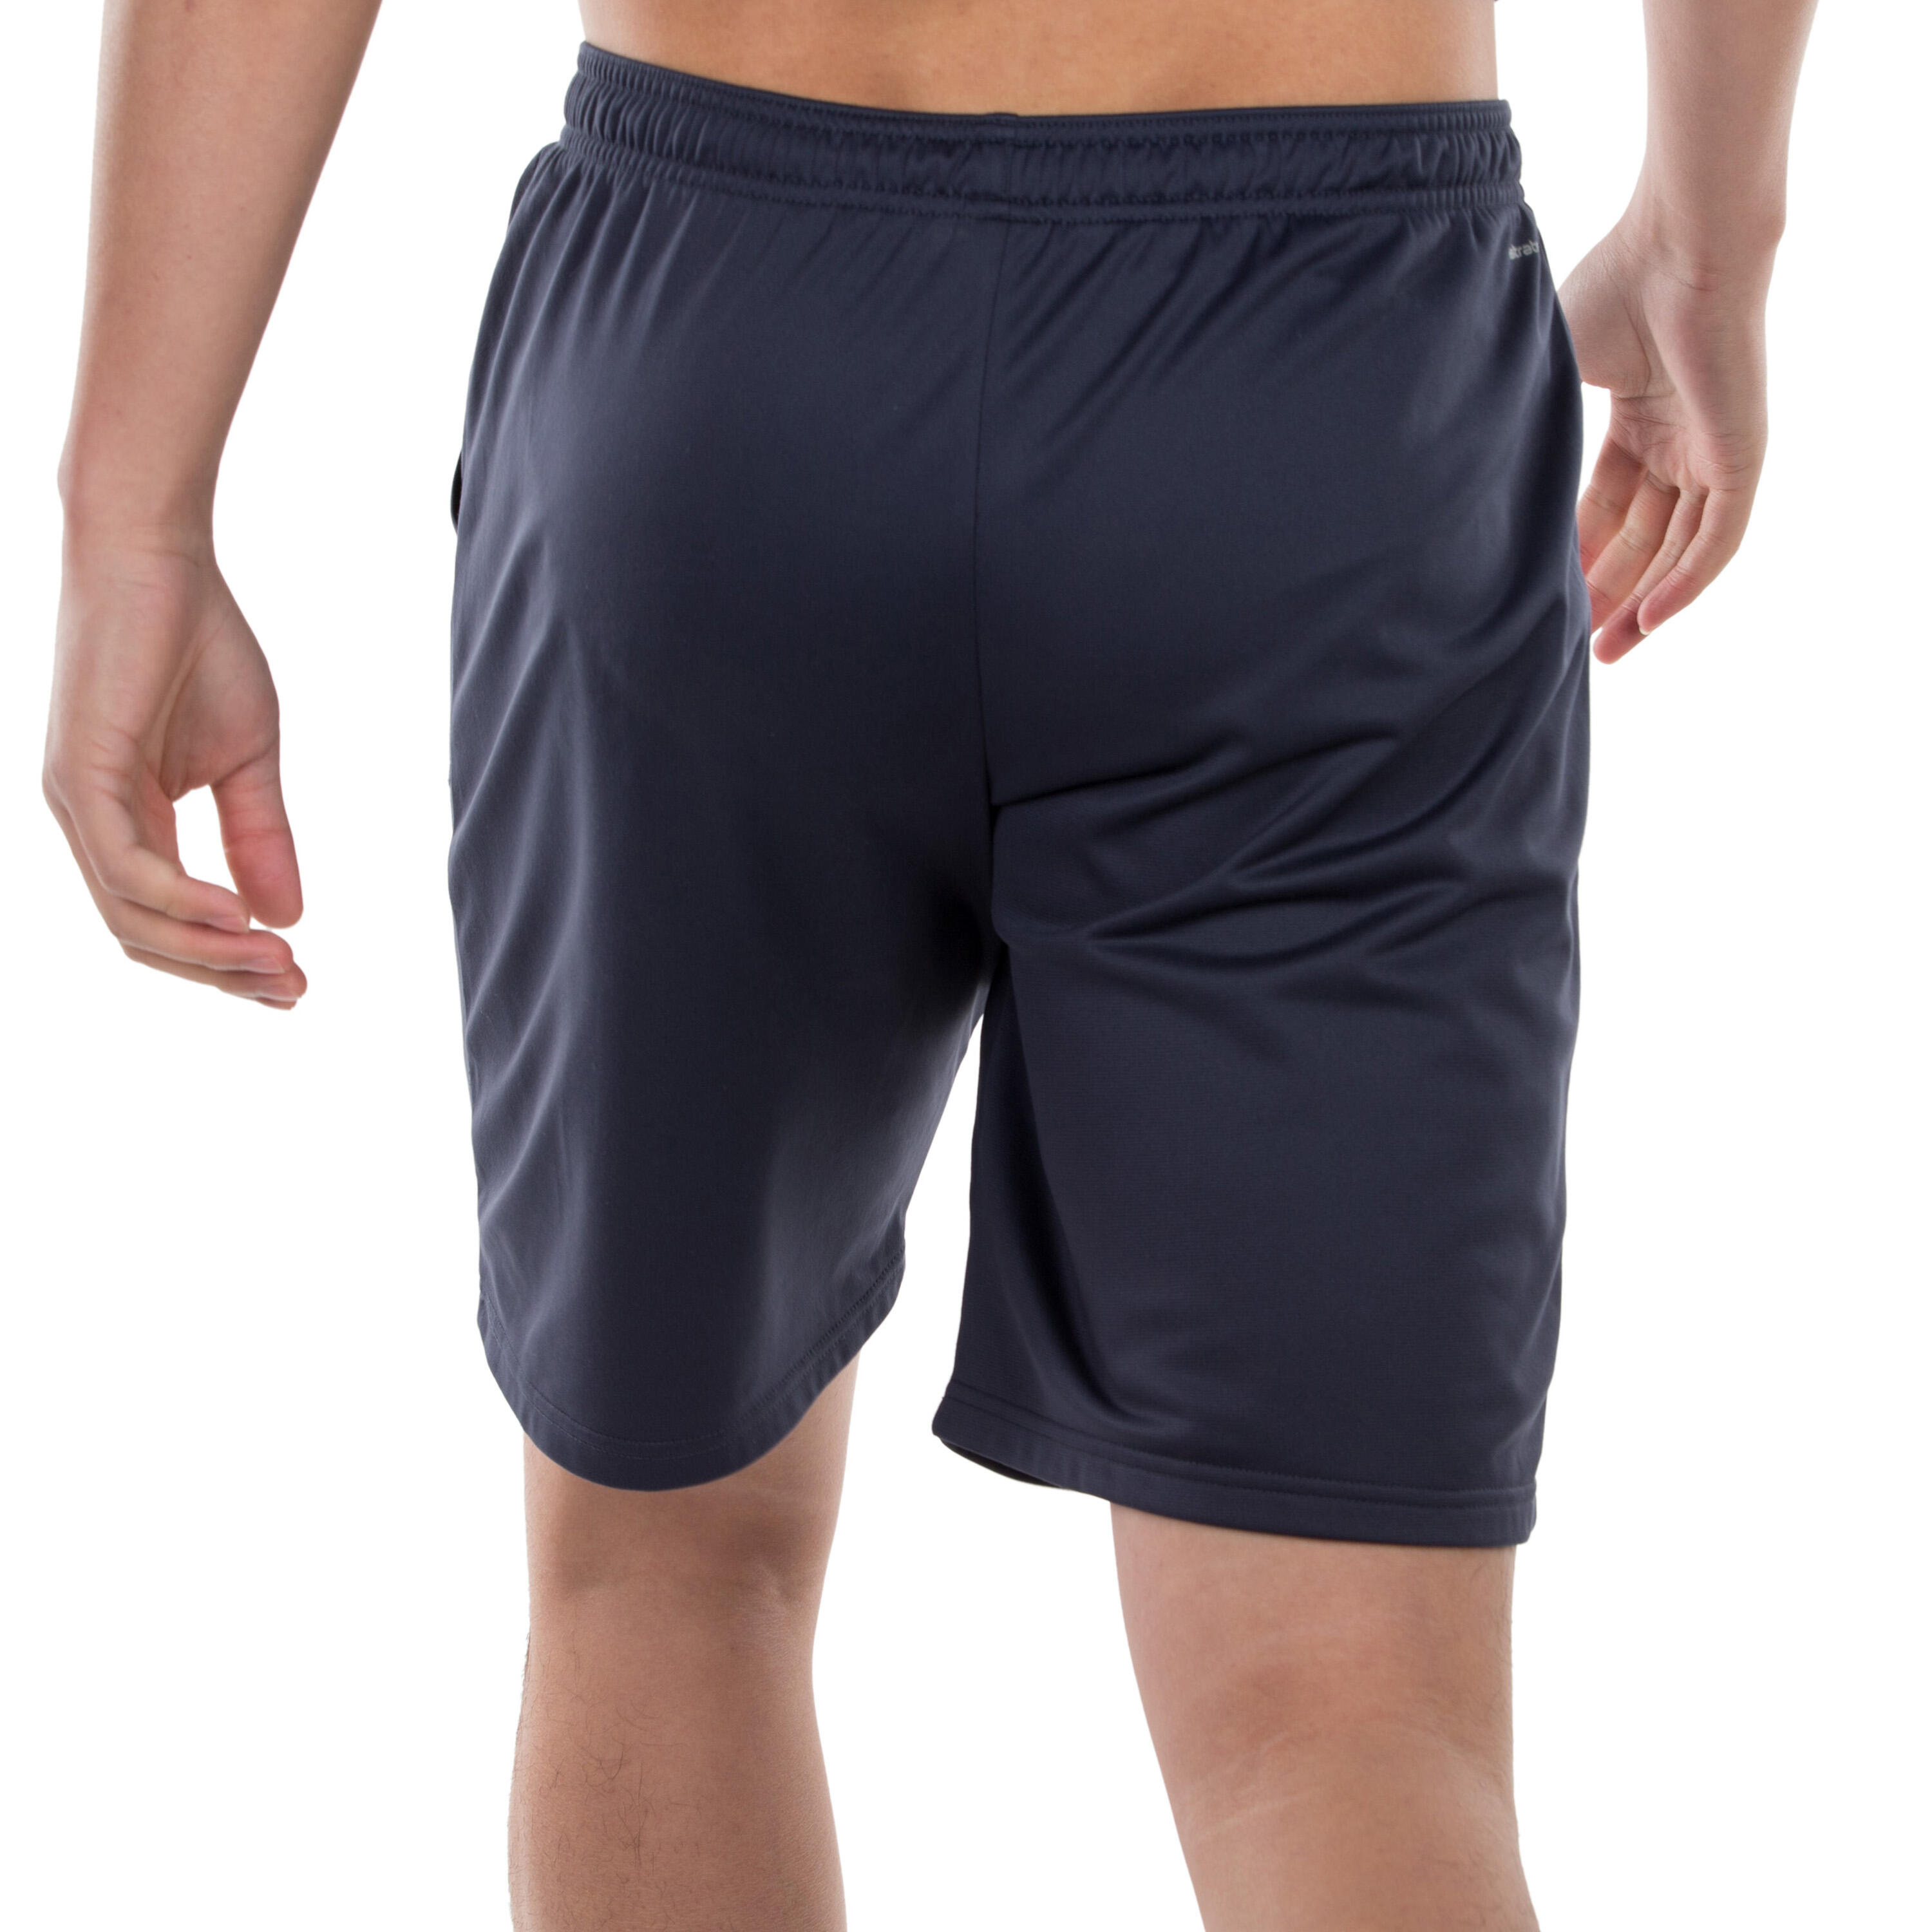 Essential Thermal Shorts - Navy Blue 8/8